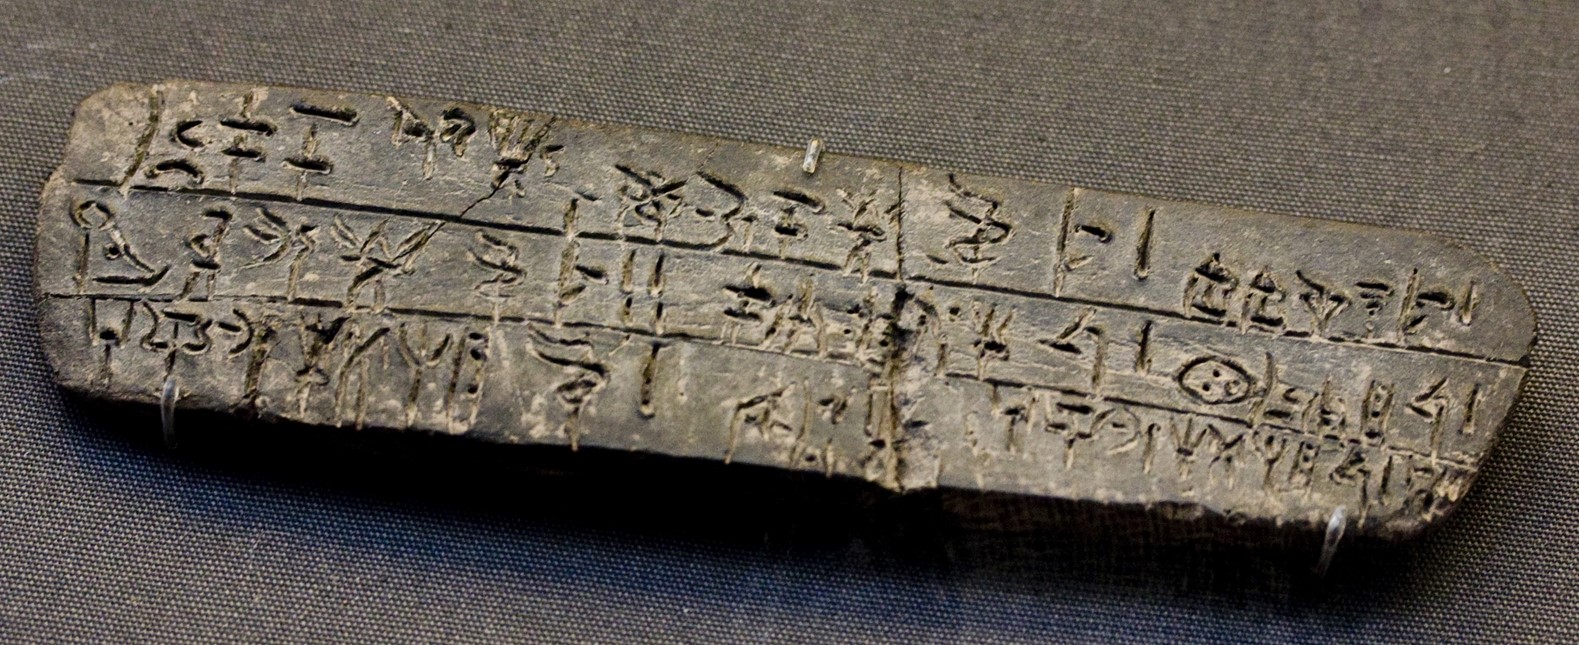 The clay tablet KN Fp 13, dated to 1450-1375 BC, is Minoan and was found at Knossos by Arthur Evans. It records, in Greek written in Linear B, quantities of oil apparently offered to various deities.